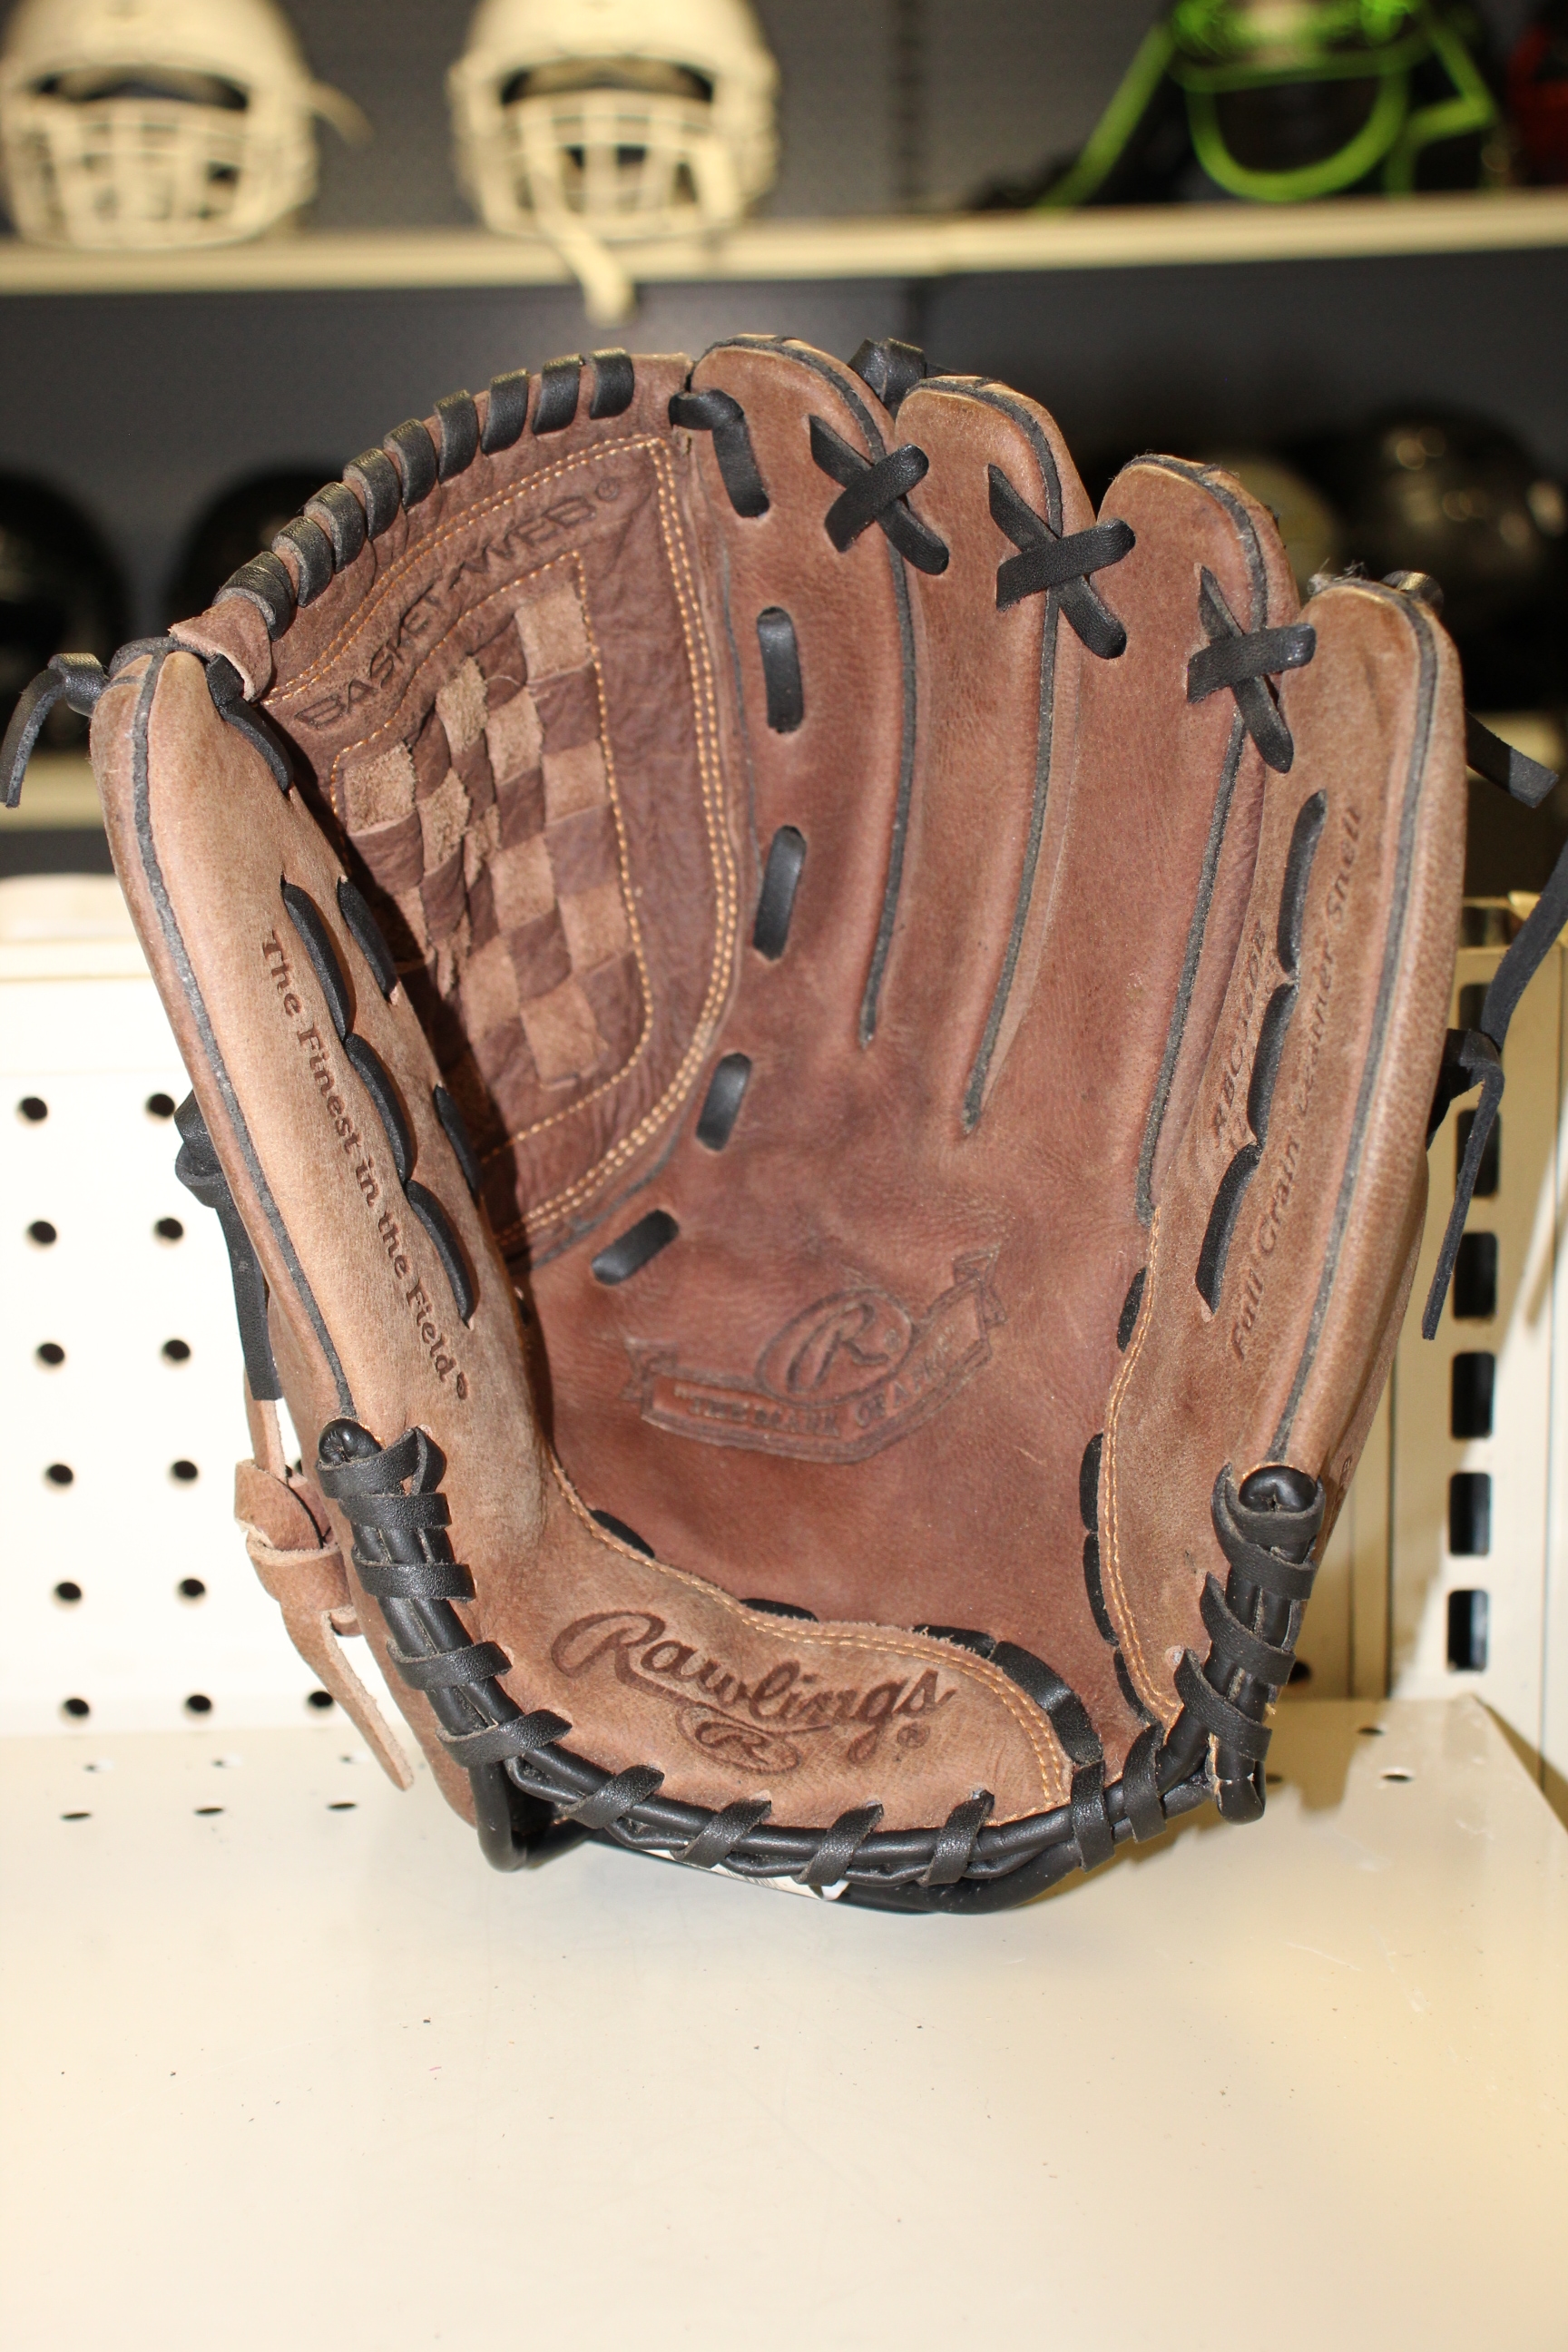 New Right Hand Throw Rawlings Infield Player Preferred Baseball Glove 12.5"